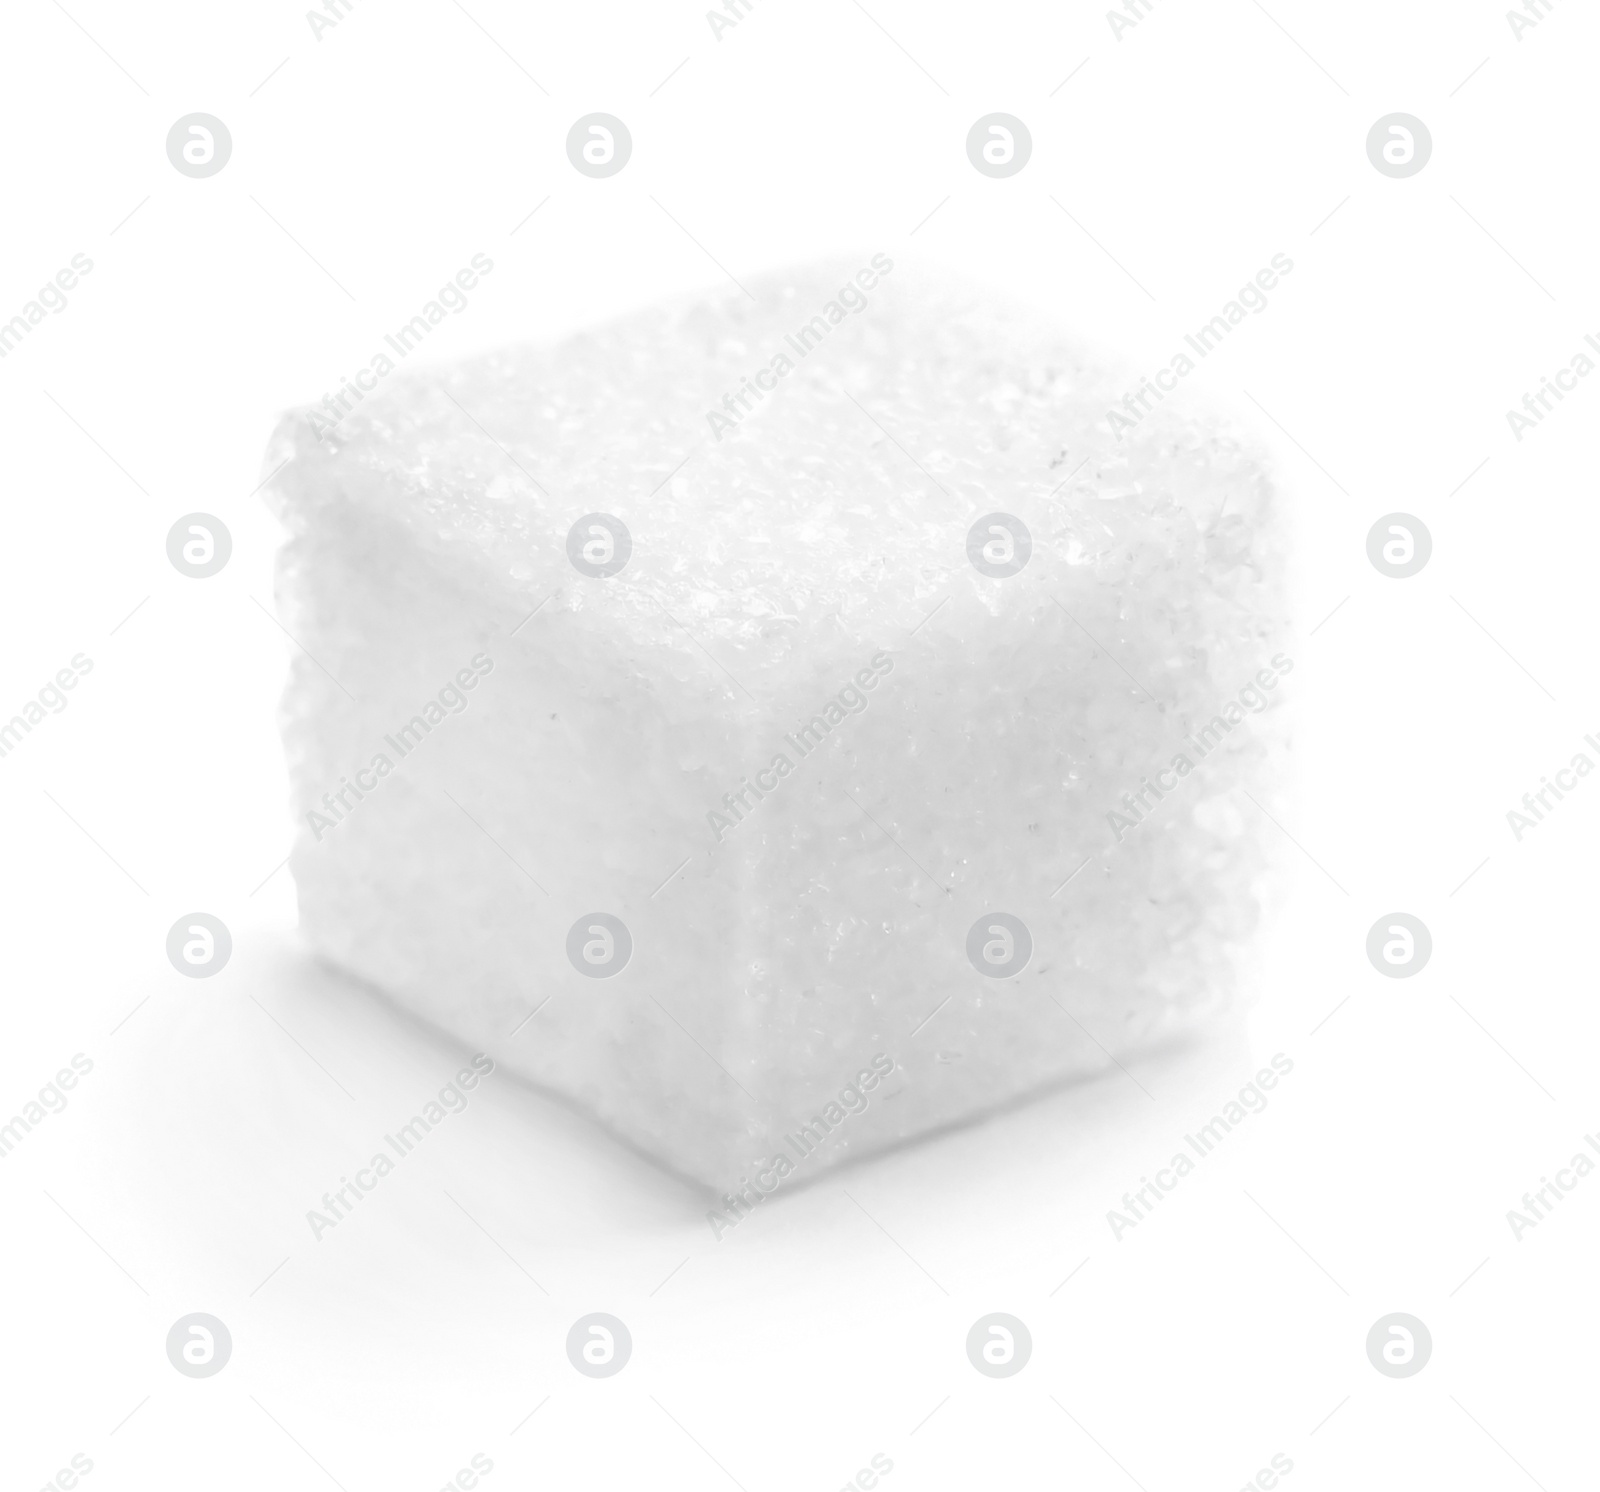 Photo of Refined sugar cube on white background